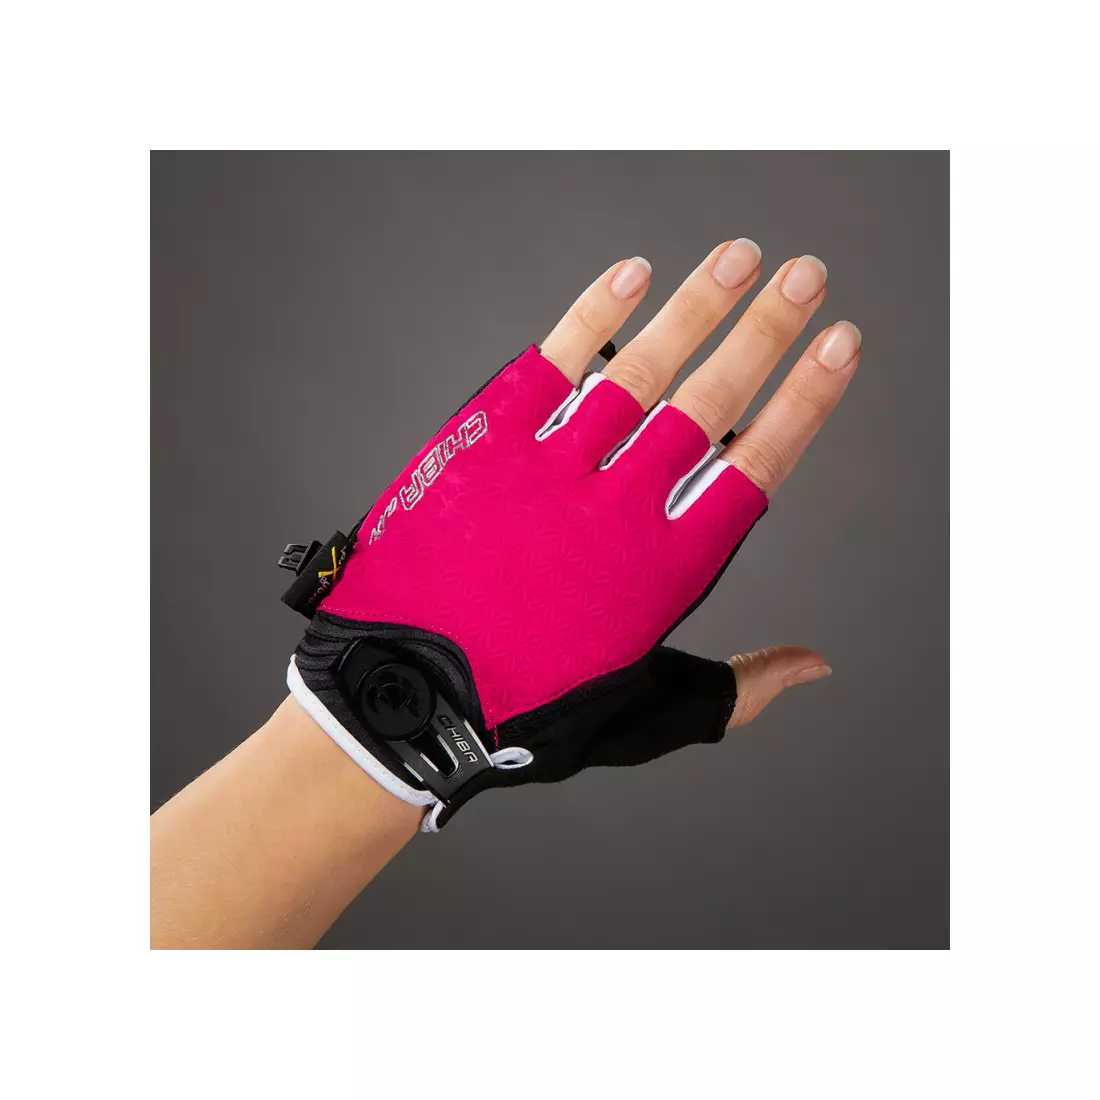 CHIBA LADY AIR PLUS women's cycling gloves, pink